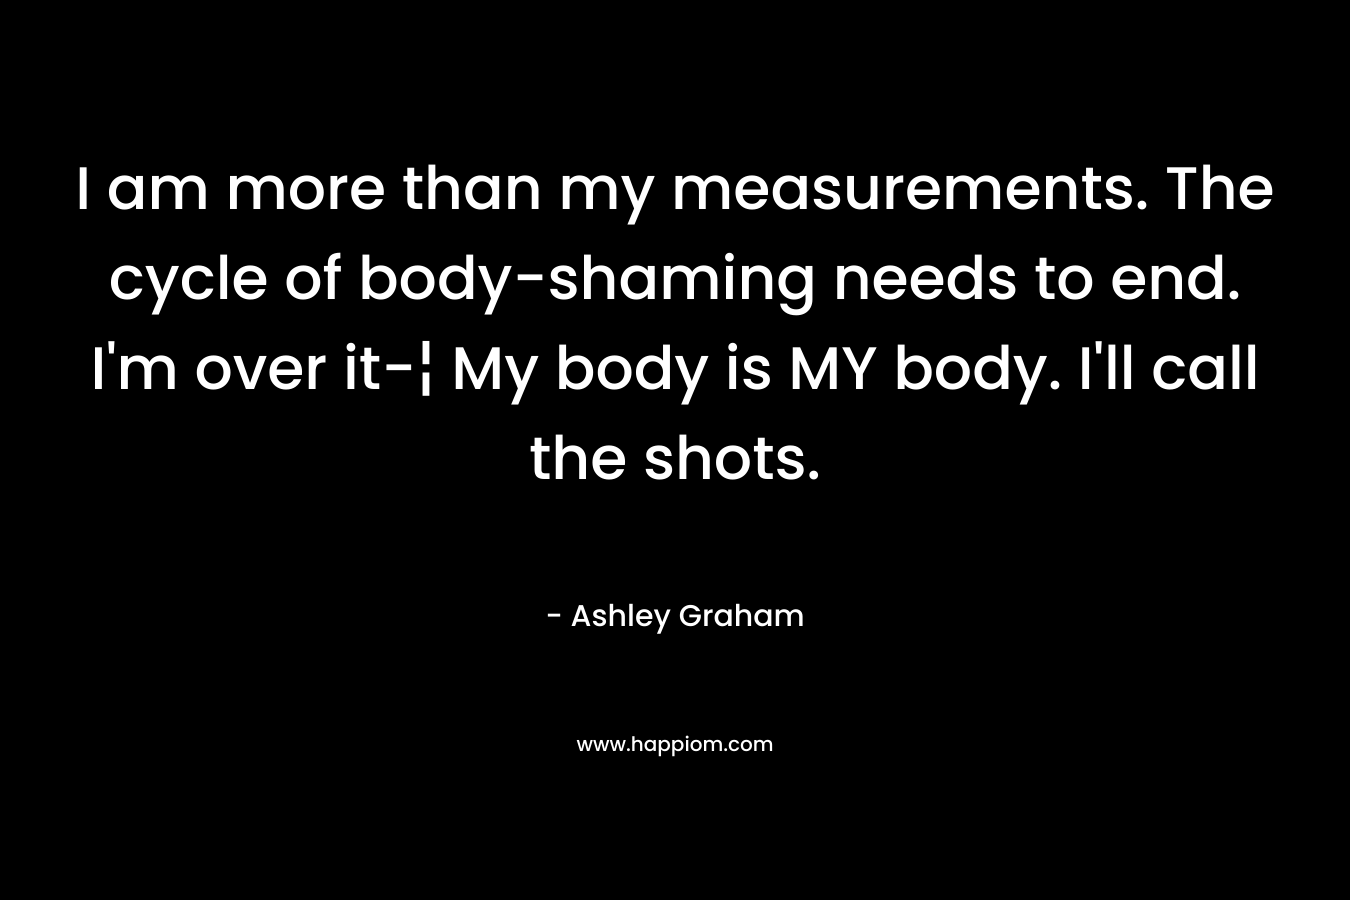 I am more than my measurements. The cycle of body-shaming needs to end. I'm over it-¦ My body is MY body. I'll call the shots.